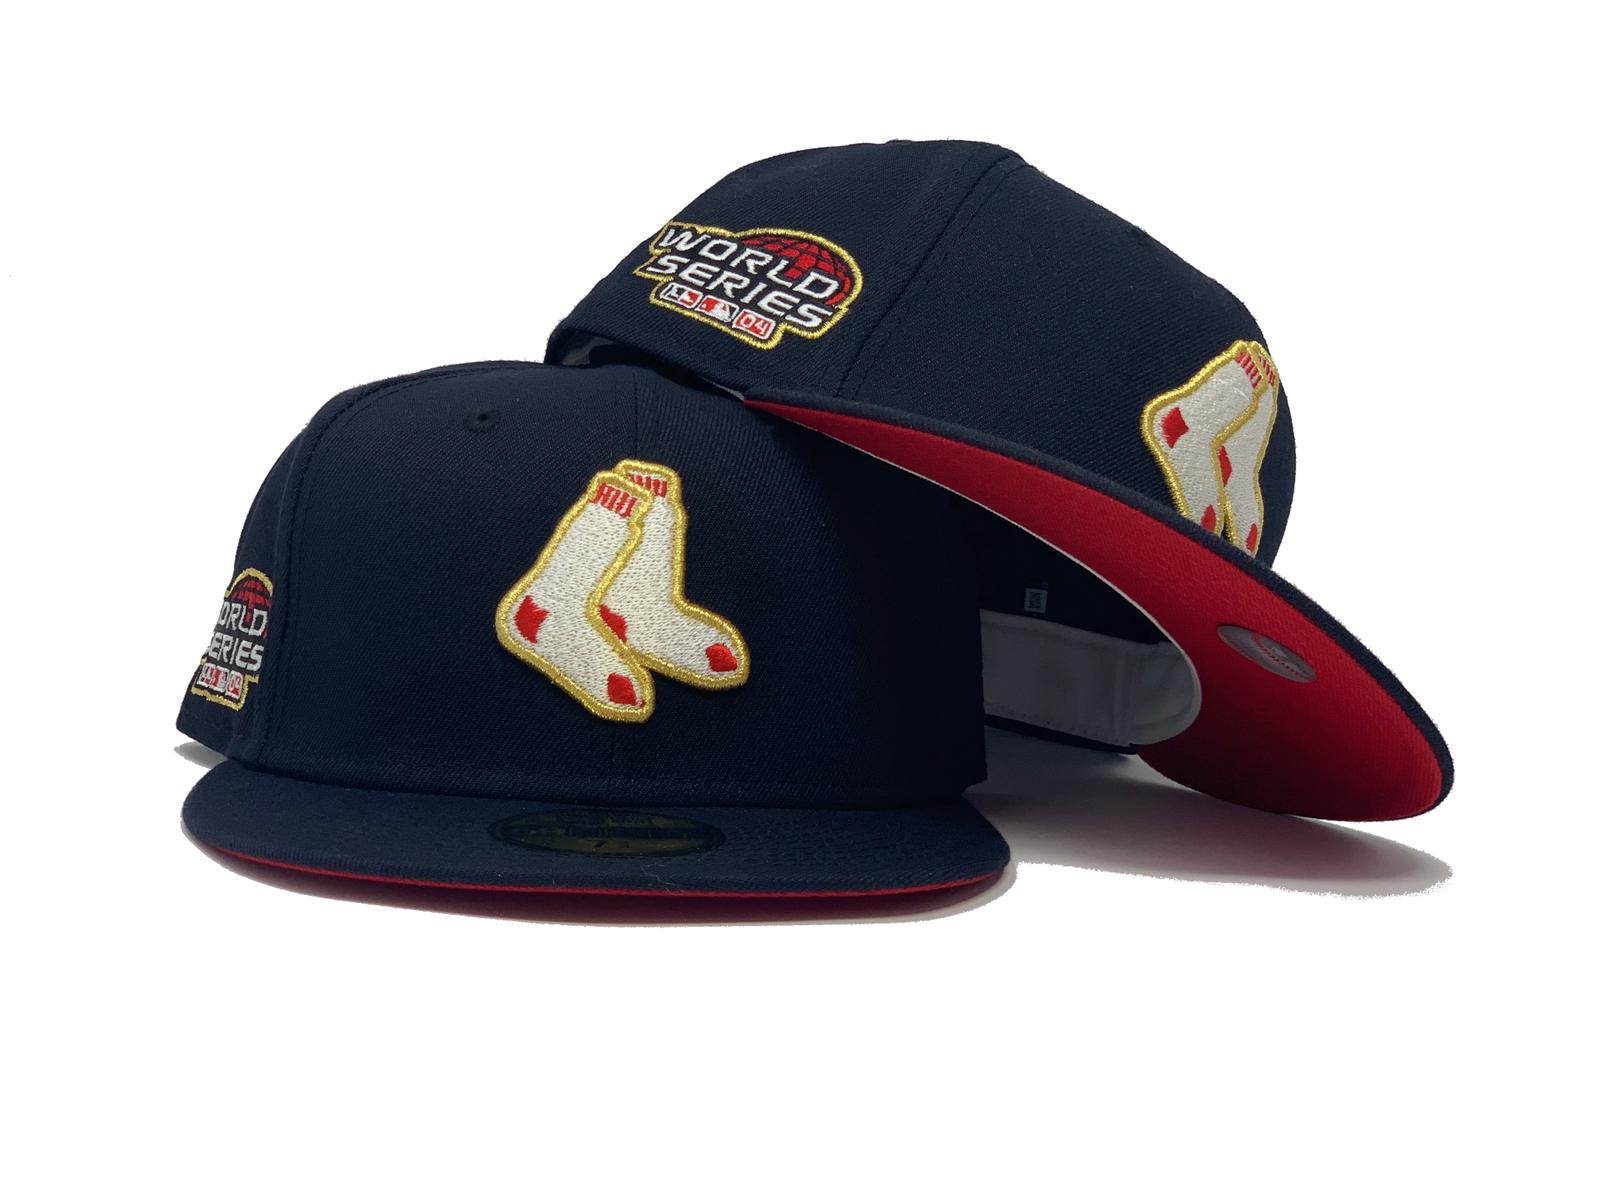 Cap in Hand - Dirt Dogs - Boston Red Sox Nation